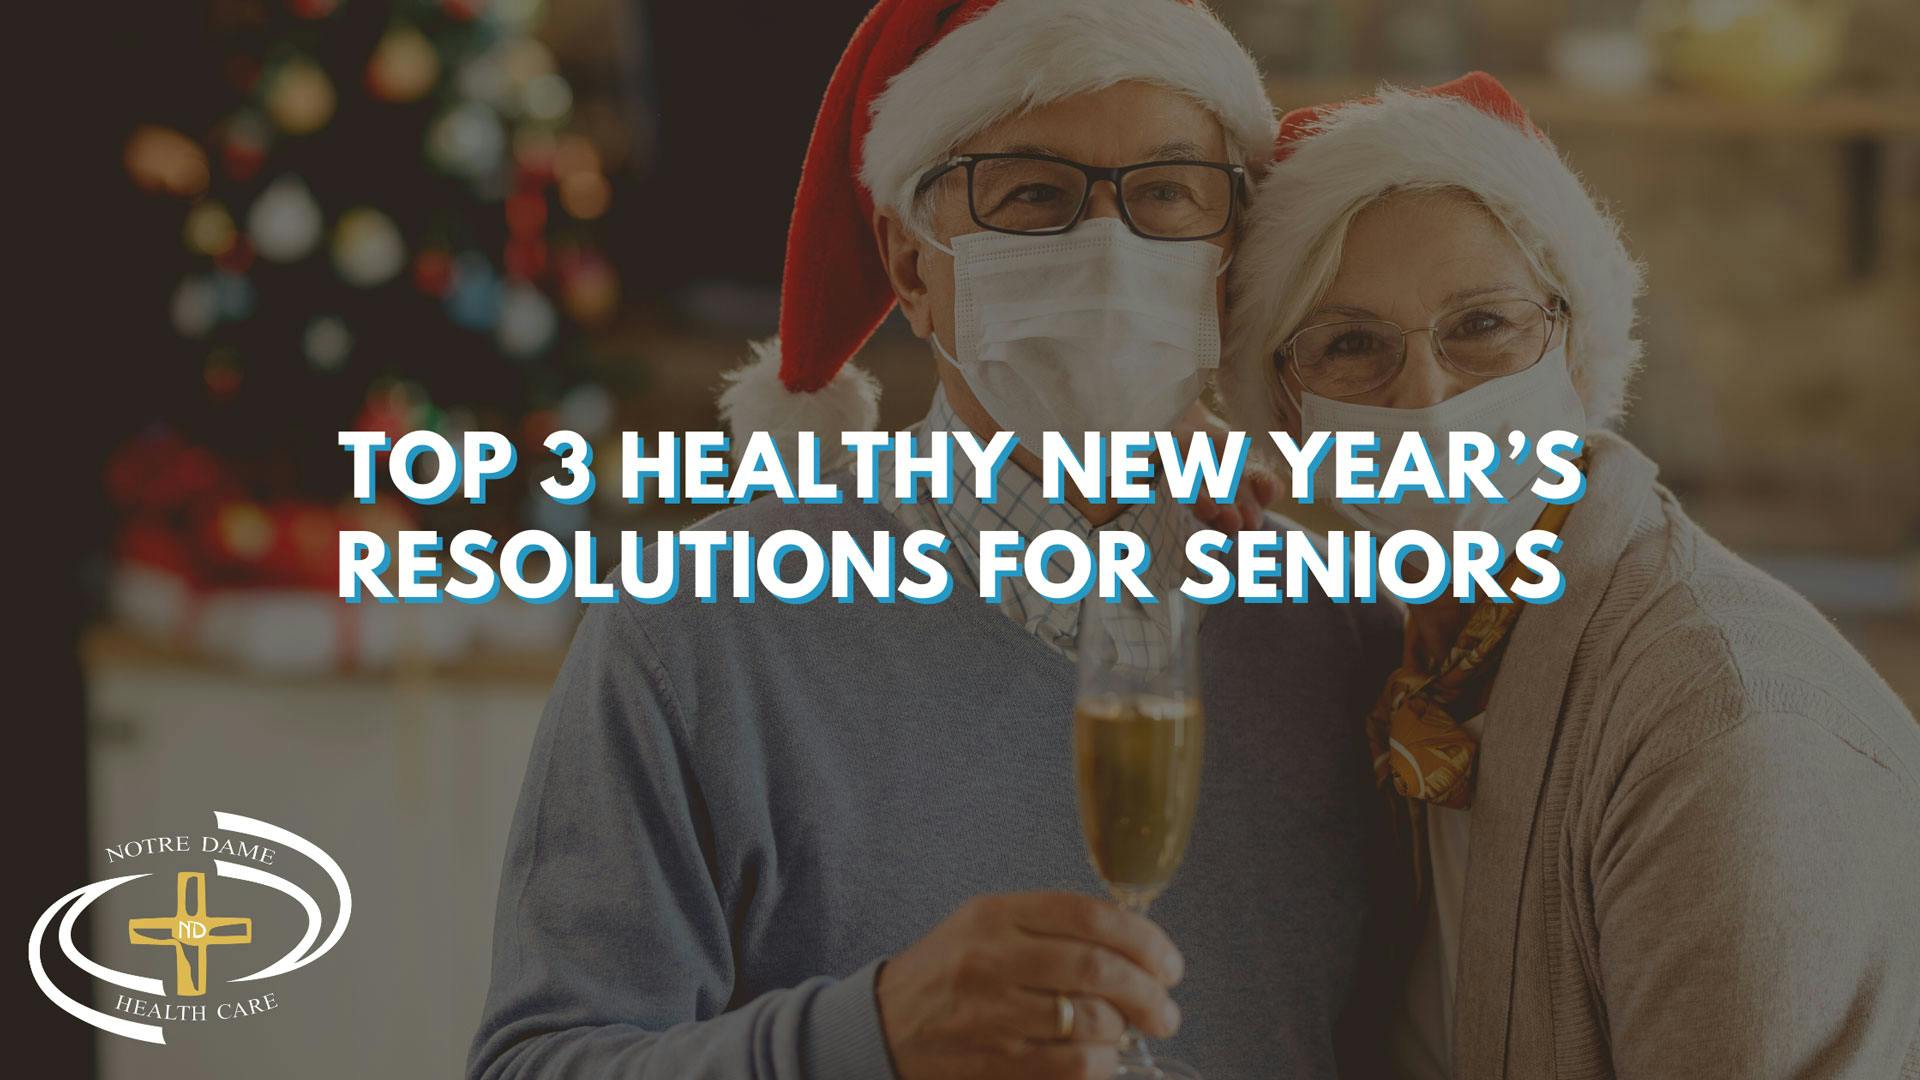 Top-3-Health-New-Years-Resolutions-for-Seniors-12-2021